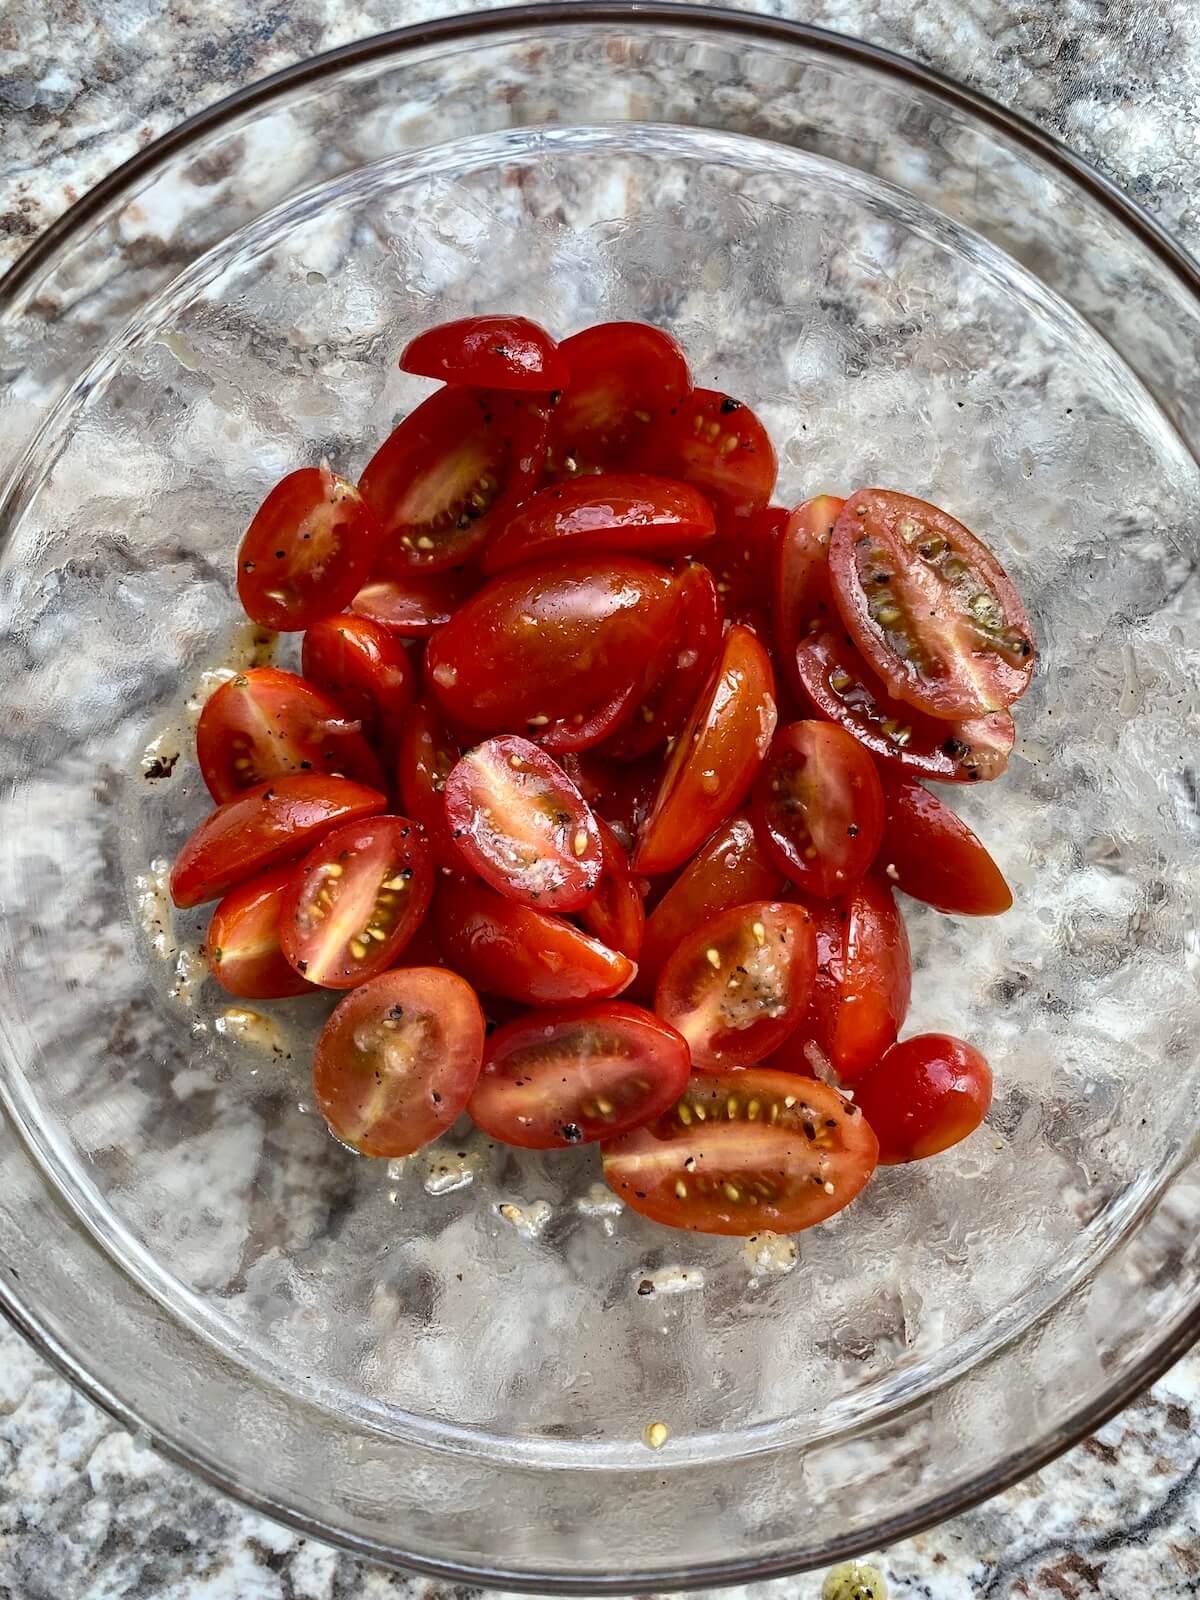 A clear glass bowl filled with halved cherry tomatoes coated with olive oil and seasonings.